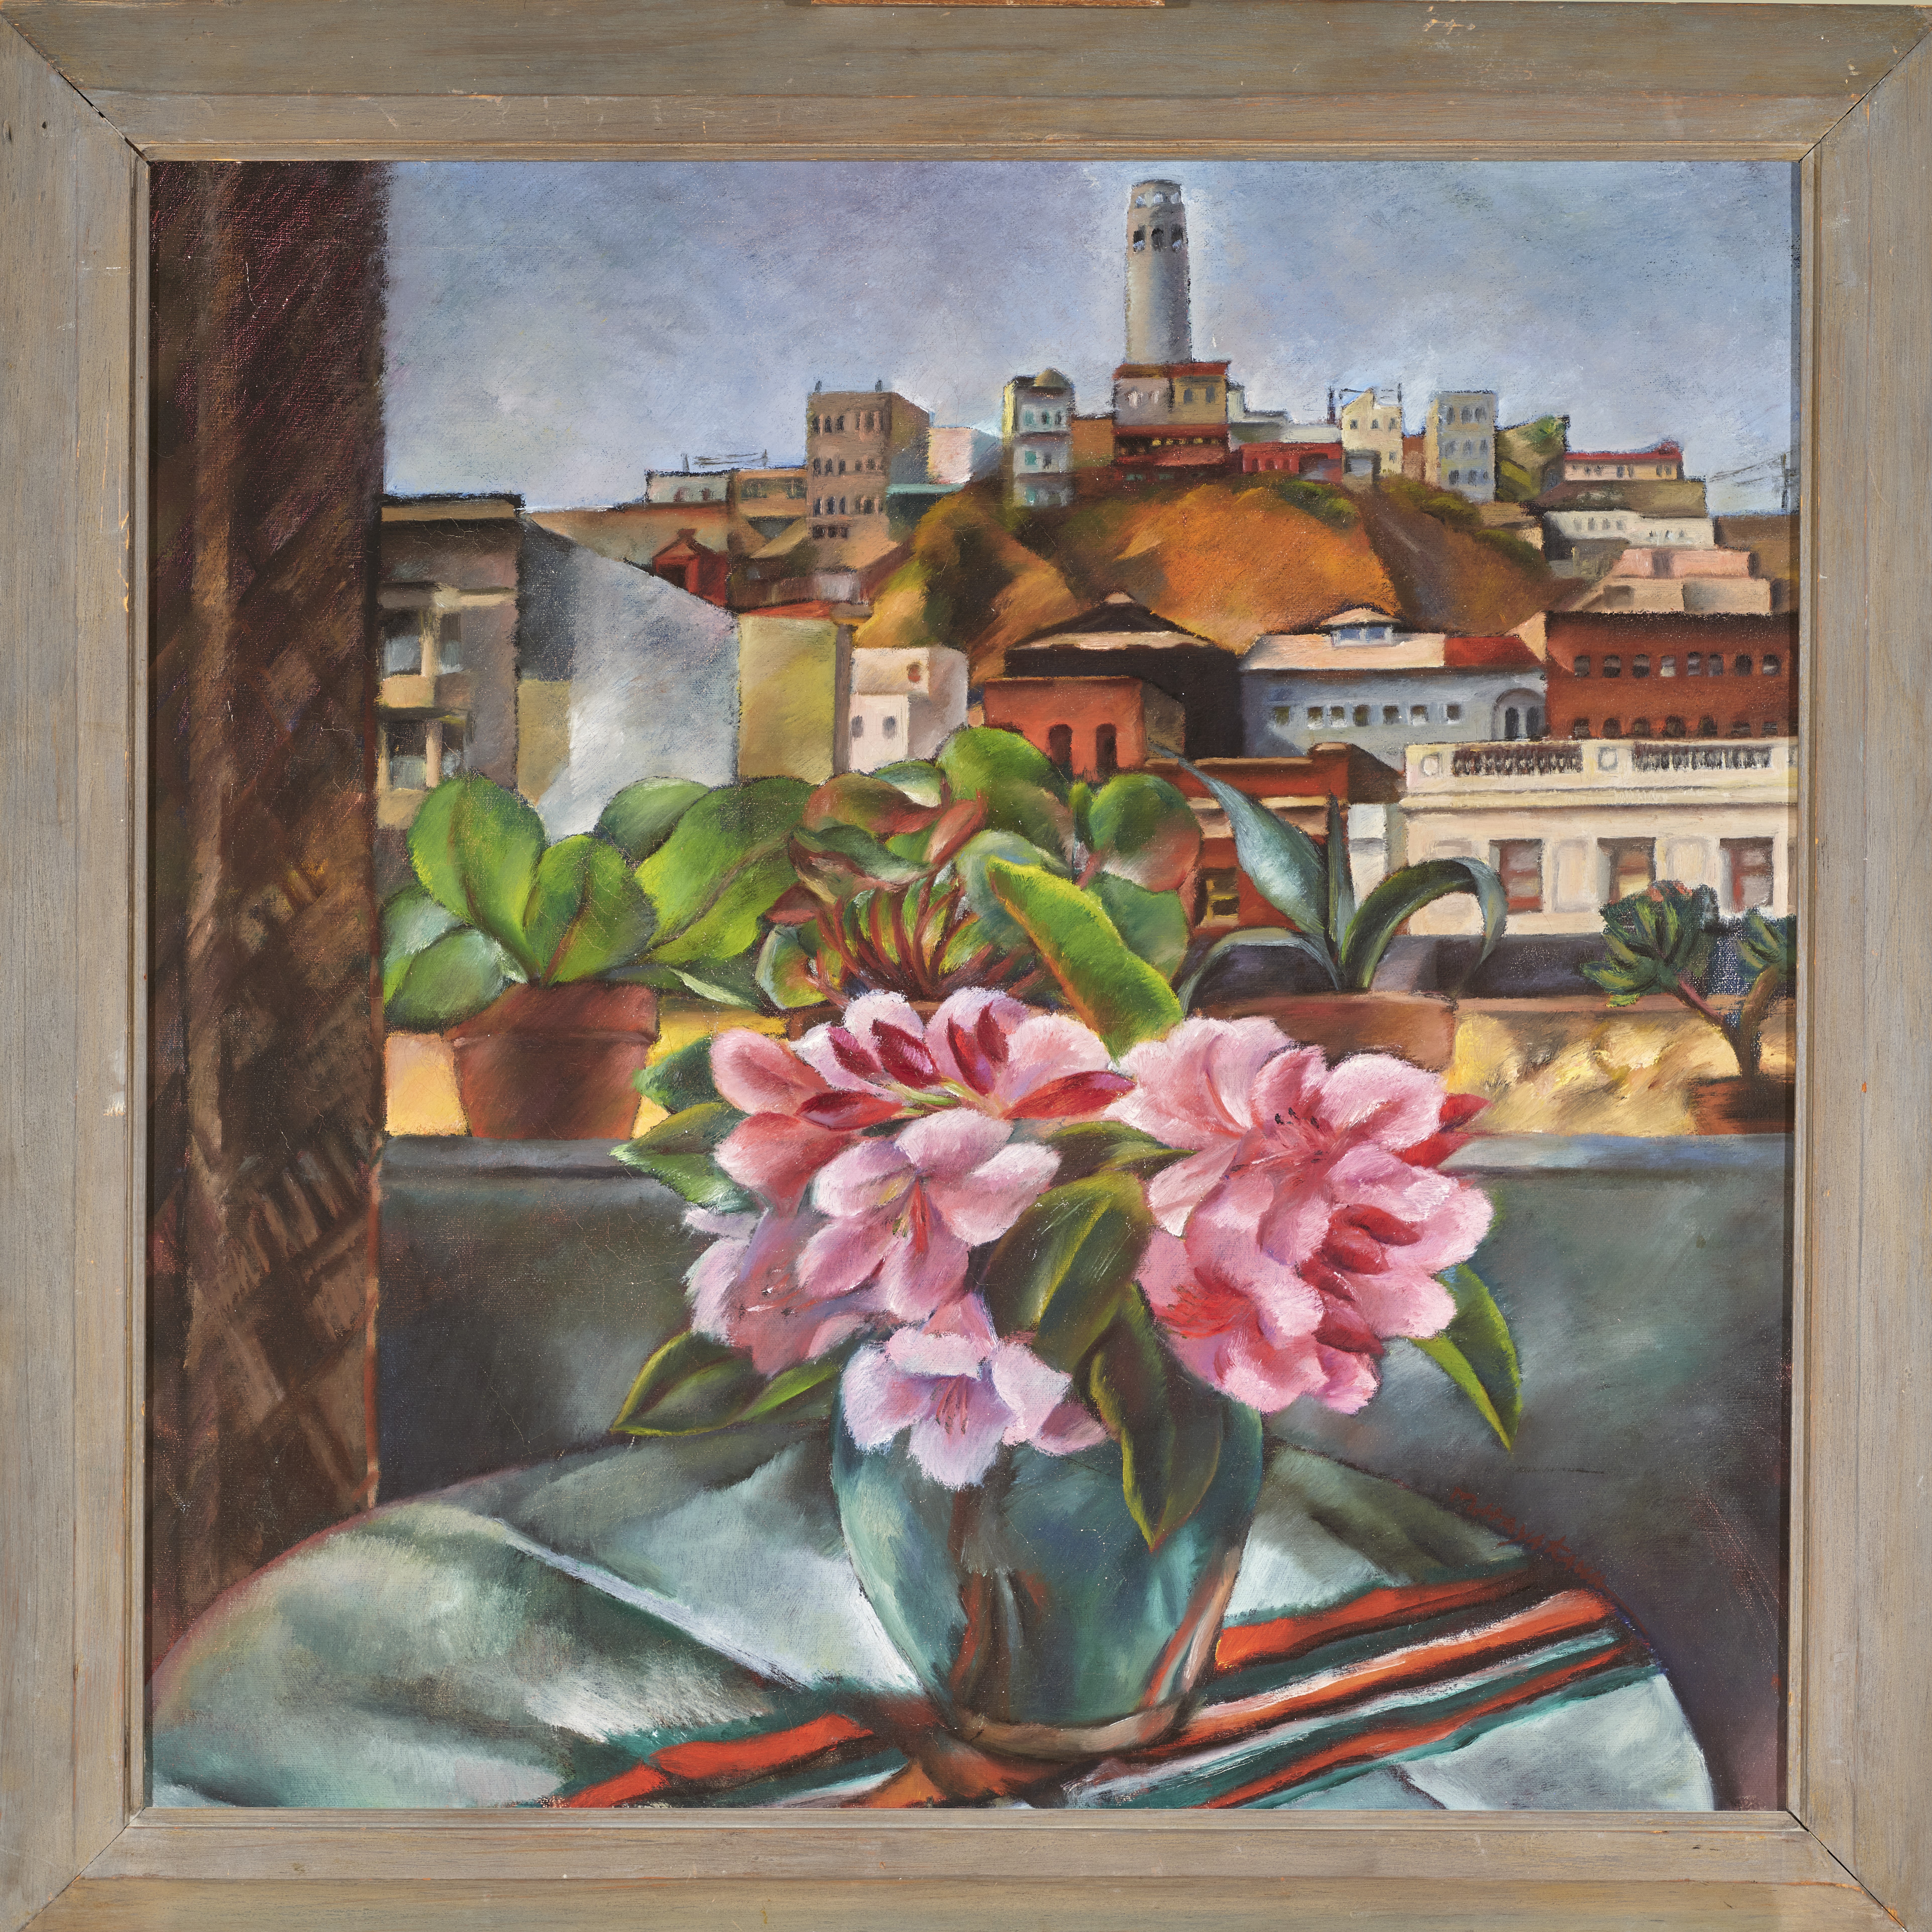 Miki Hayakawa (1904—1953), From my Window: View of Coit Tower, c. 1935. Oil on canvas, 30" x 30". From the collection of Sandra and Bram Dijkstra.